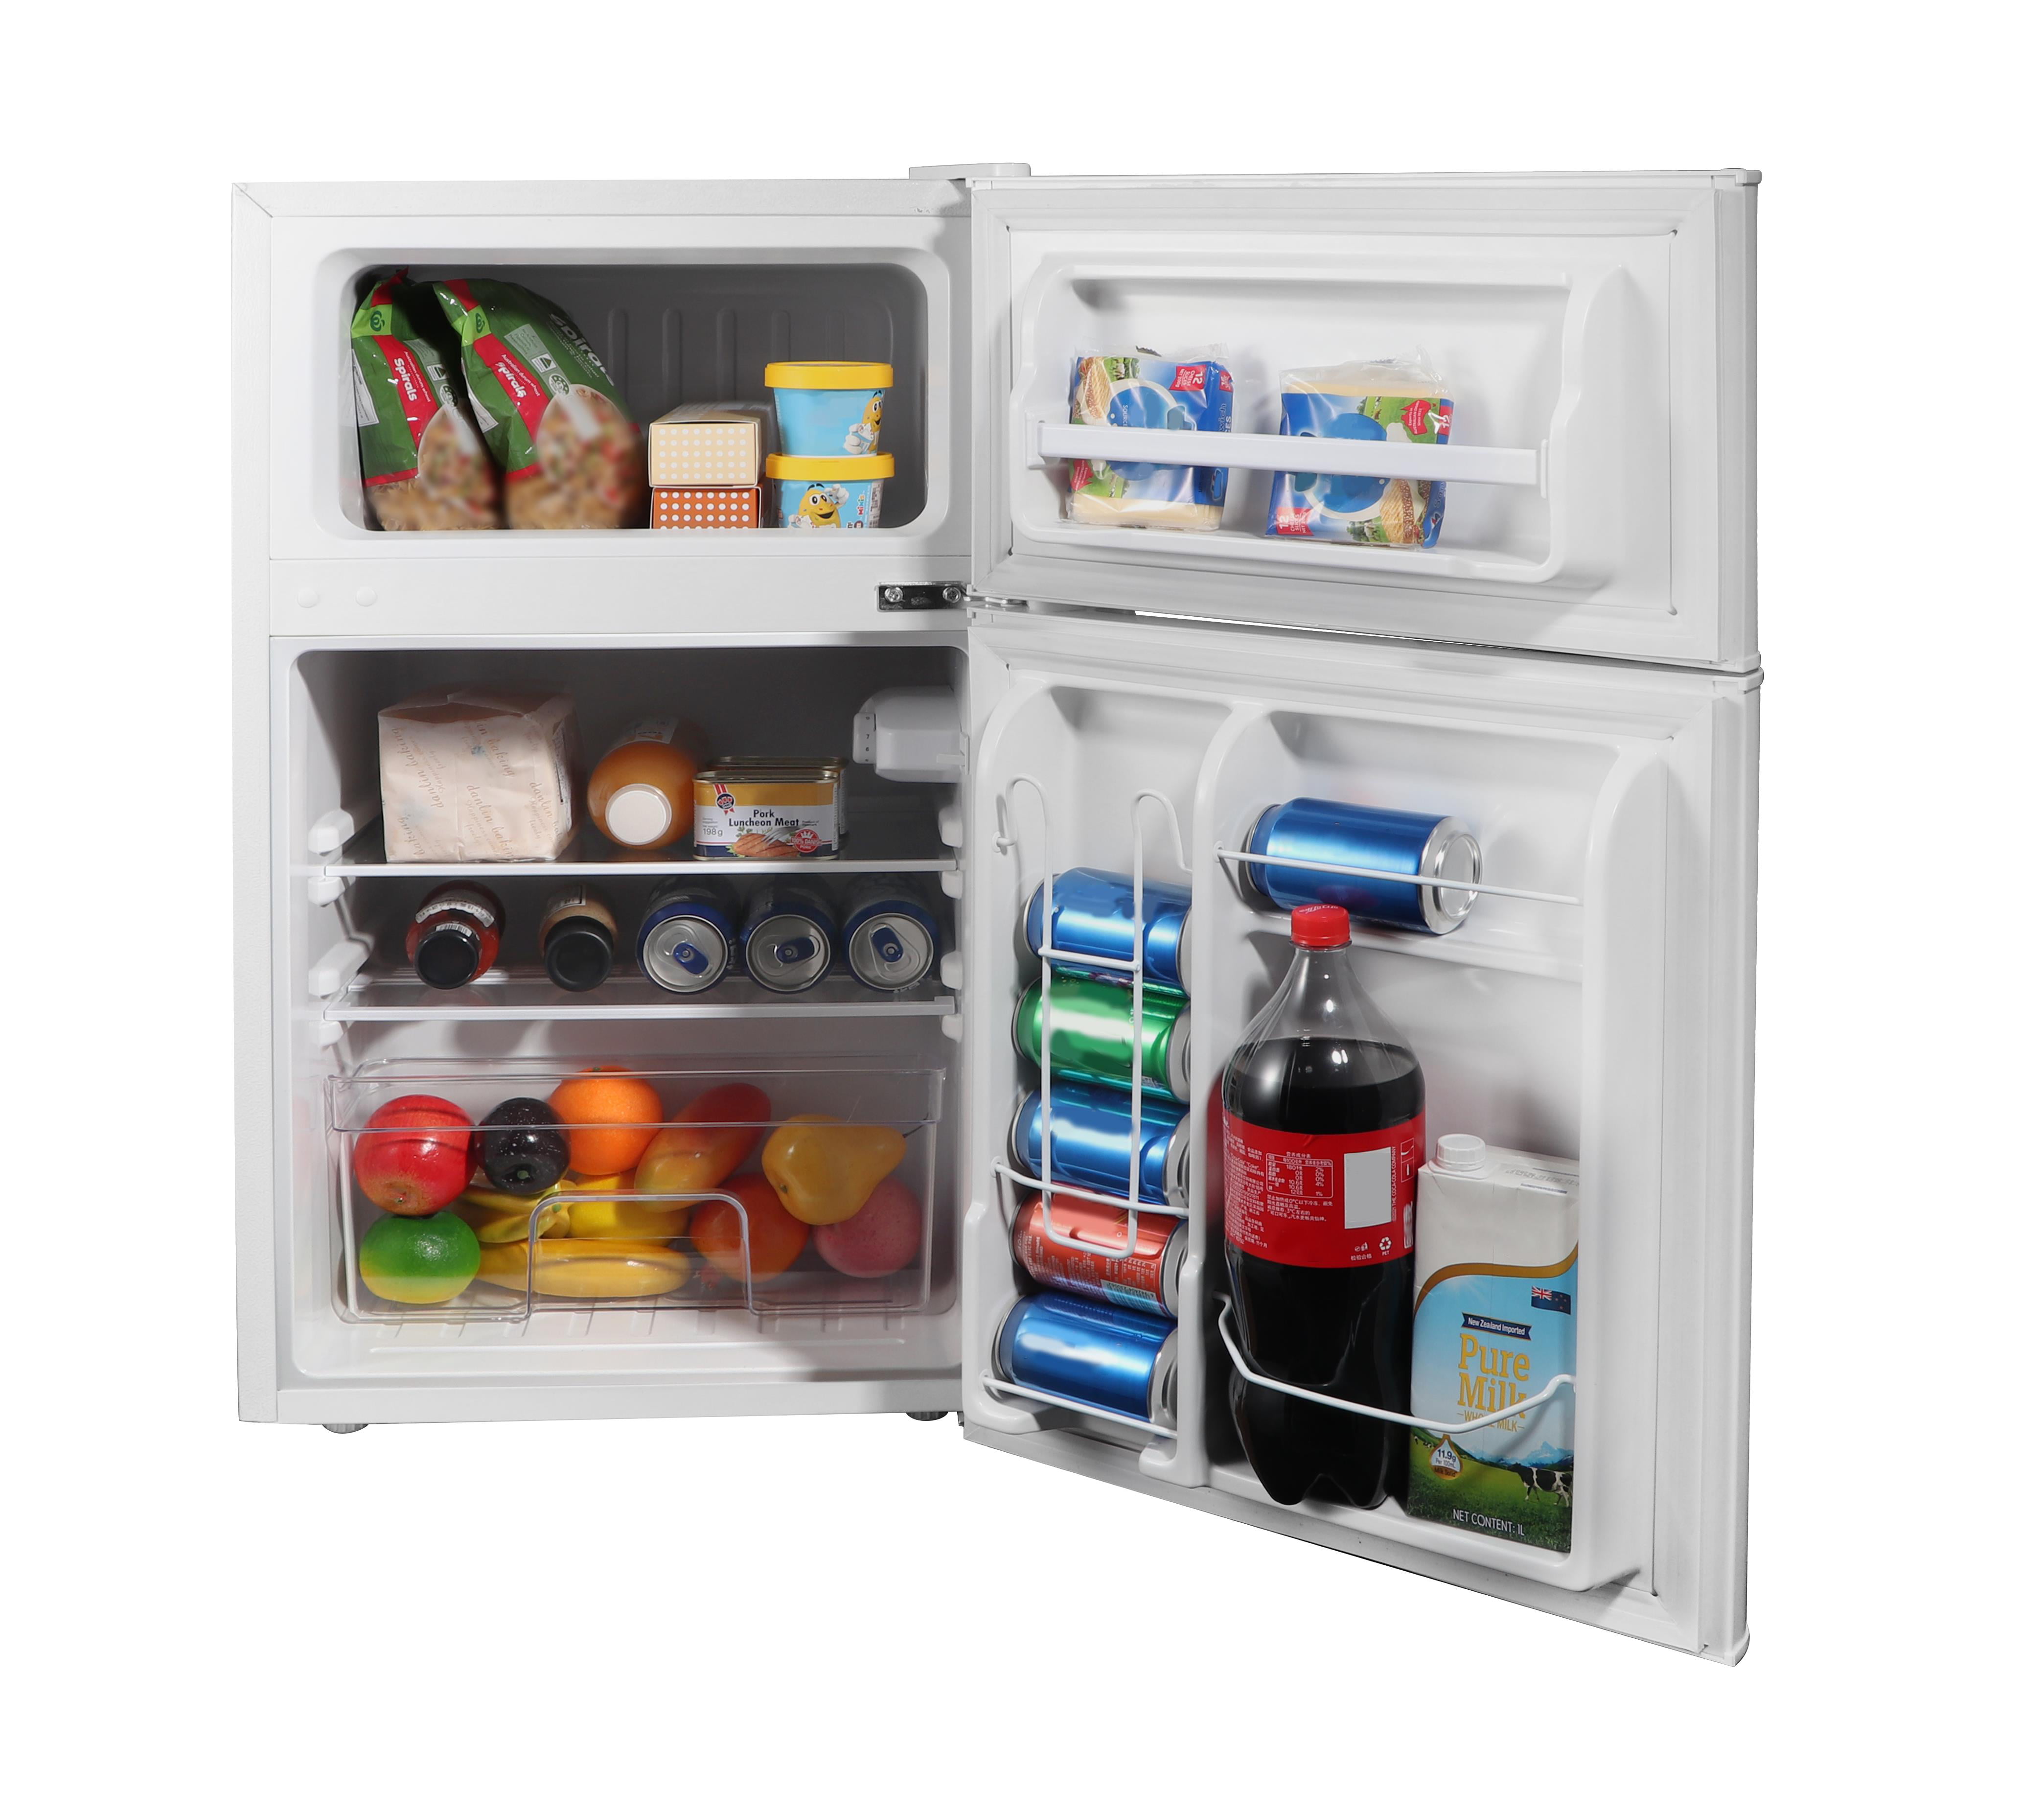  Emerson 1.6 Cu. Ft. Compact Refrigerator ENERGY STAR Fridge:  Eco-Friendly Cooling, Ample Storage, Customized Temperature Control, and  Versatile Placement for Convenience and Savings,White : Everything Else